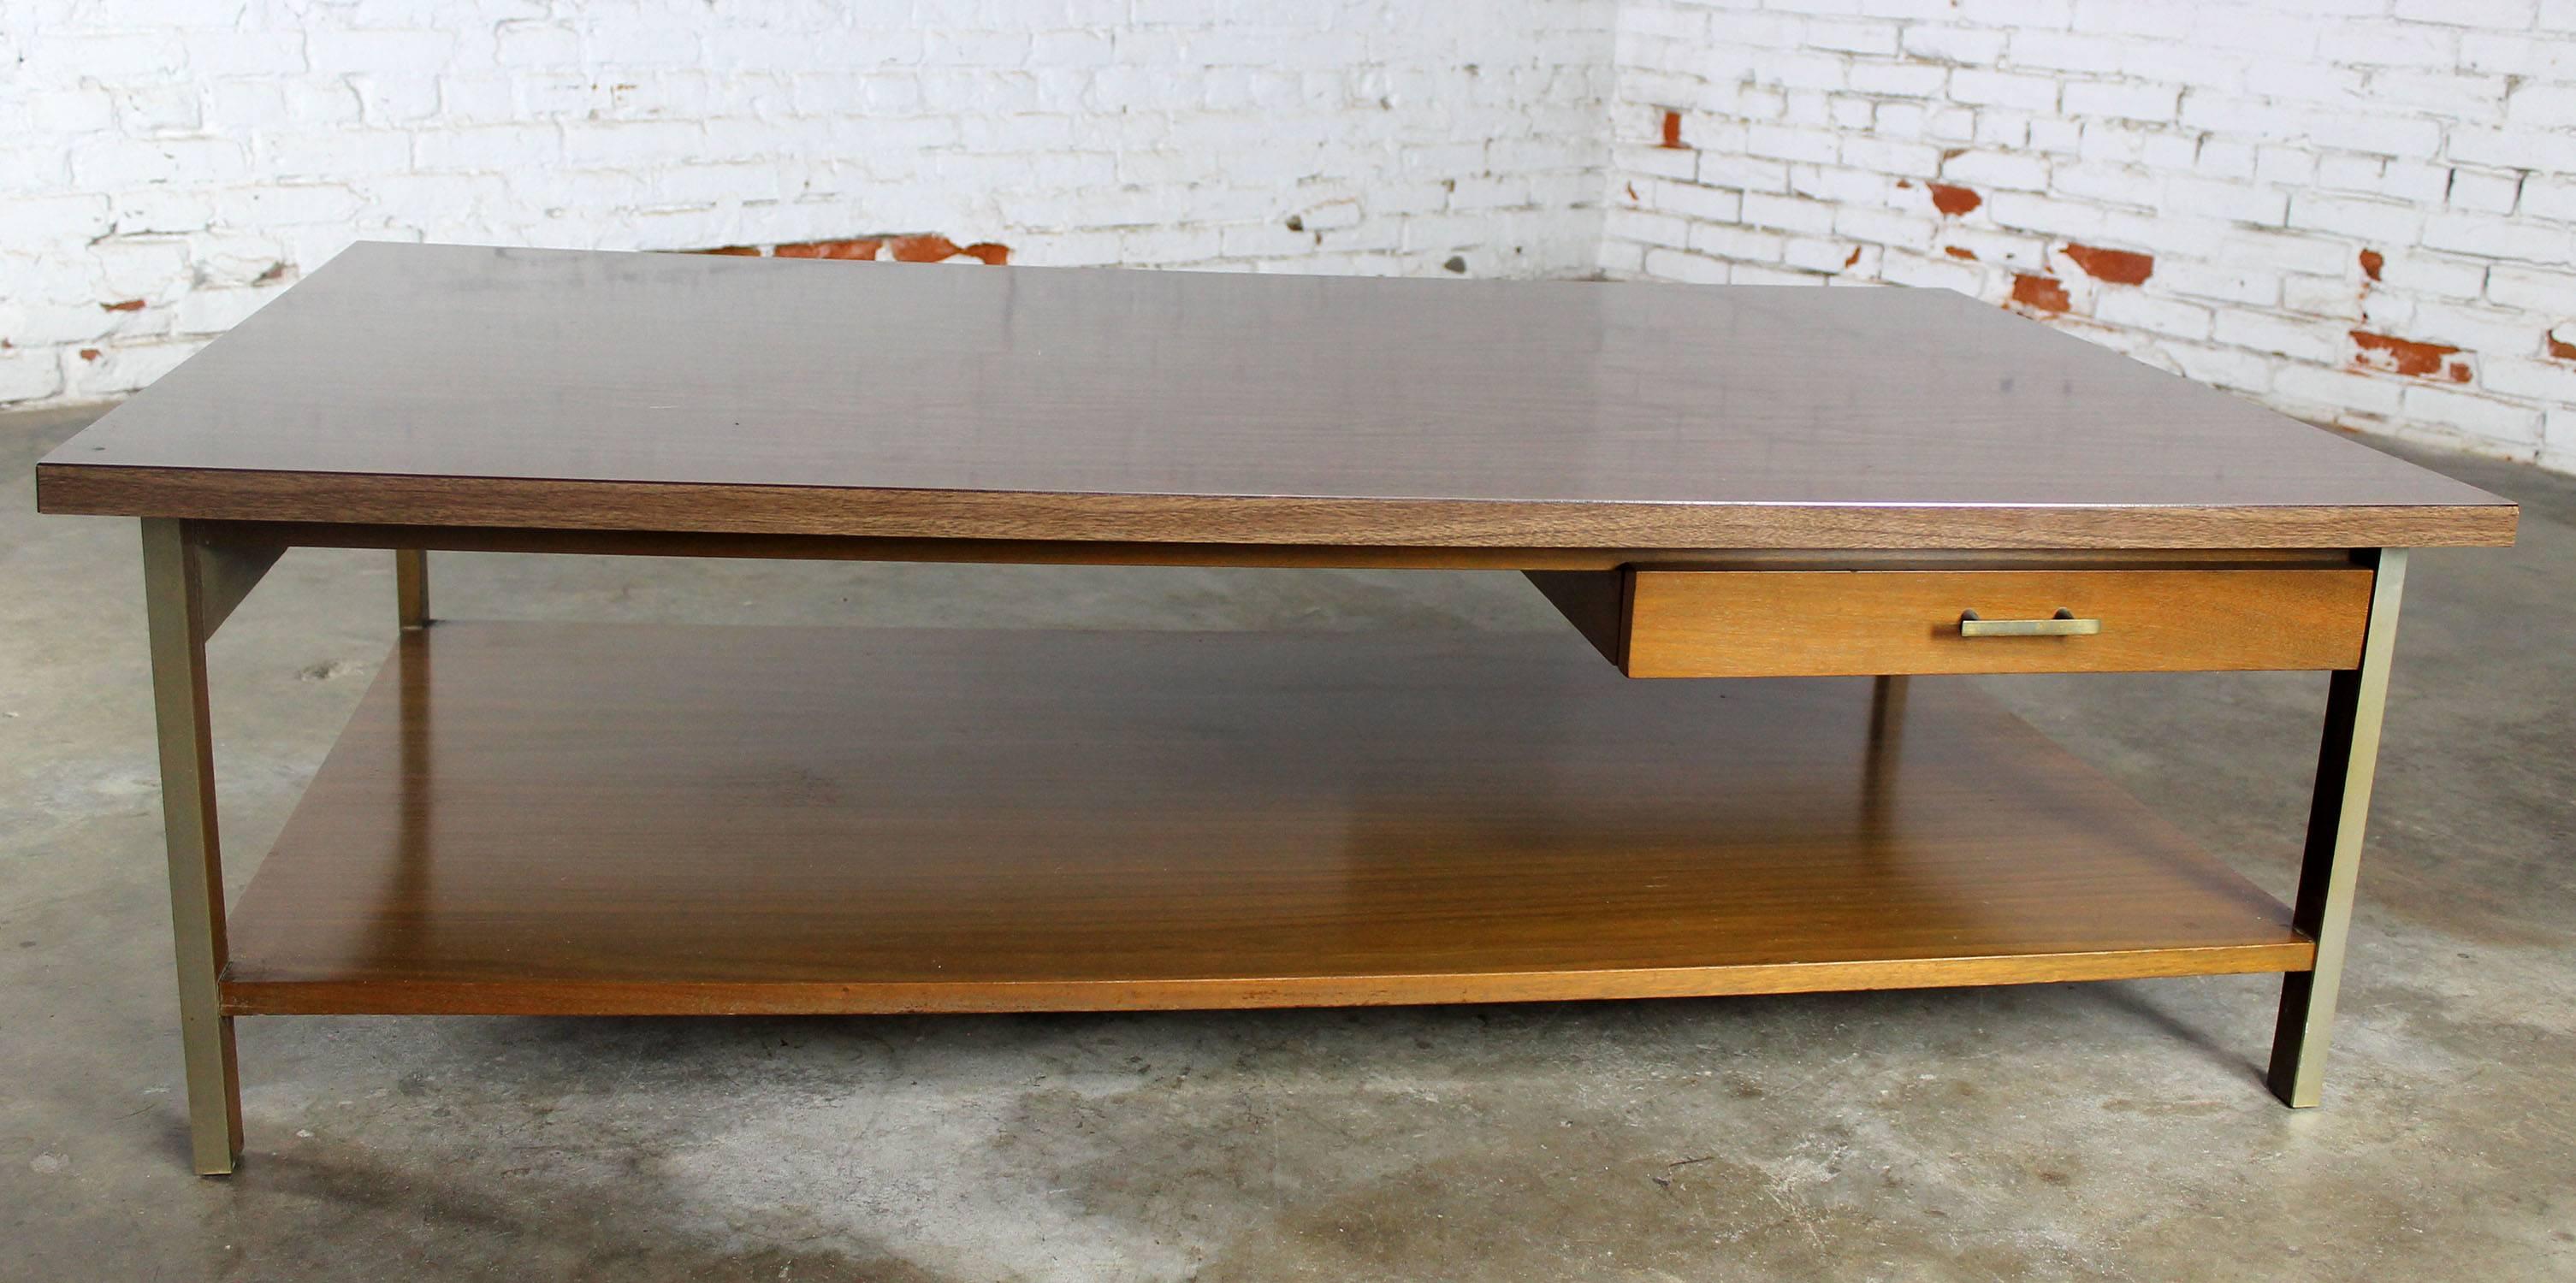 Wonderful iconic linear group coffee table by Paul McCobb for Calvin. Walnut, laminate and aluminium. In great vintage condition.

Wonderful coffee table by Paul McCobb from his linear group by Calvin. This icon of Mid-Century design is not only